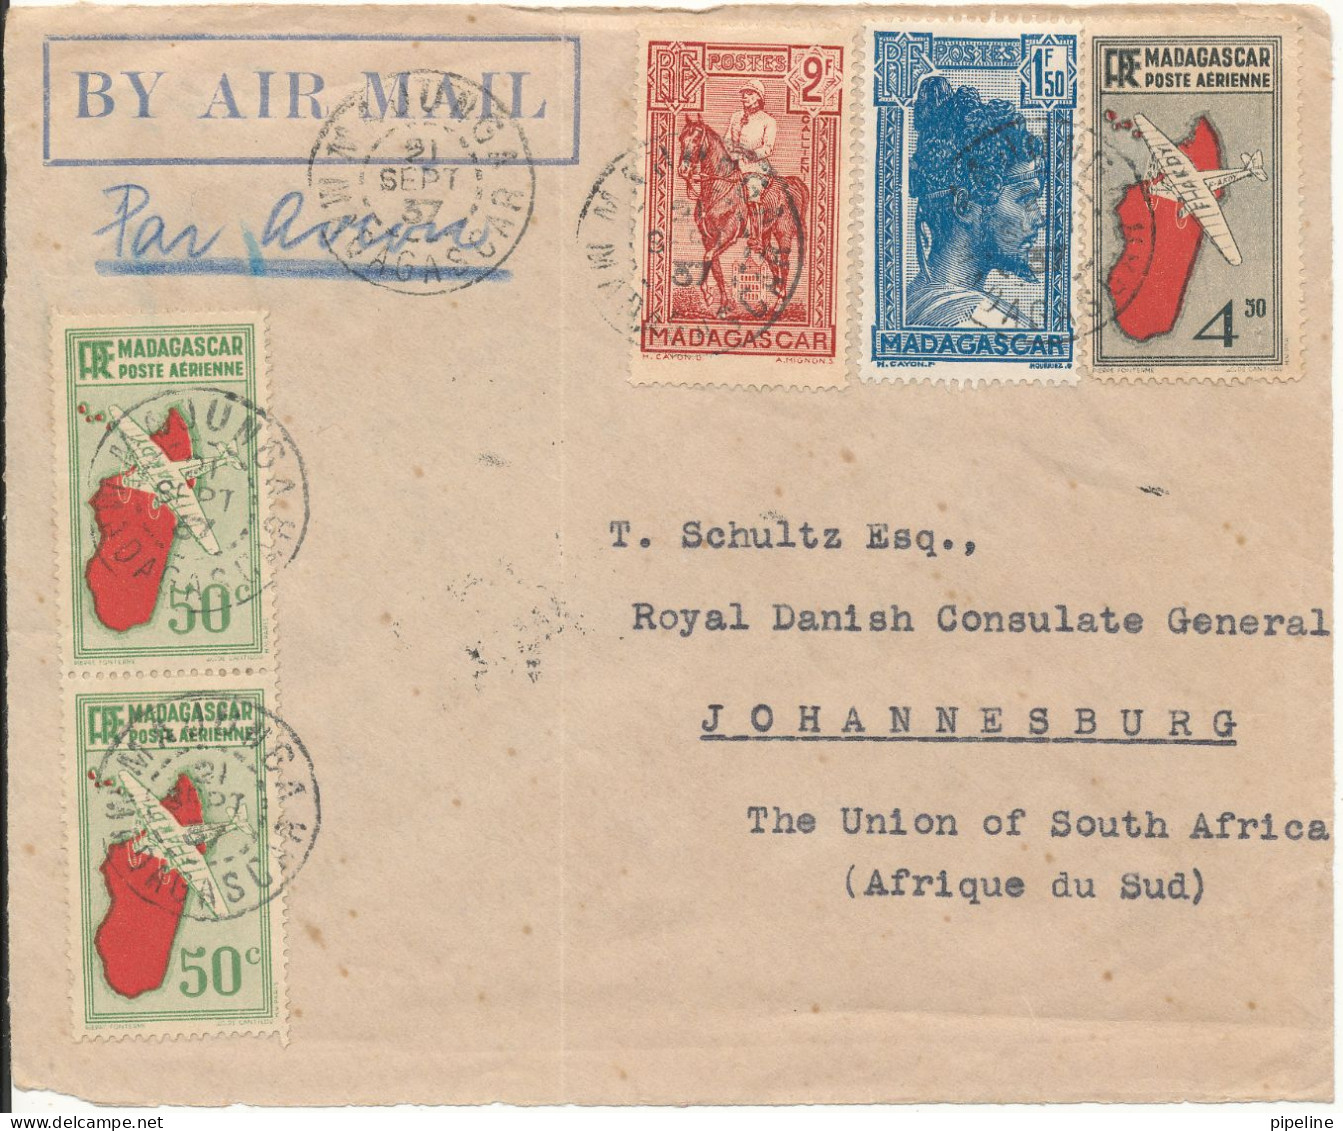 Madagascar FRONTPAGE Of A Cover Sent To The Royal Danish Consulate Johannesburg South Africa 21-9-1937 NB: NB : - Posta Aerea